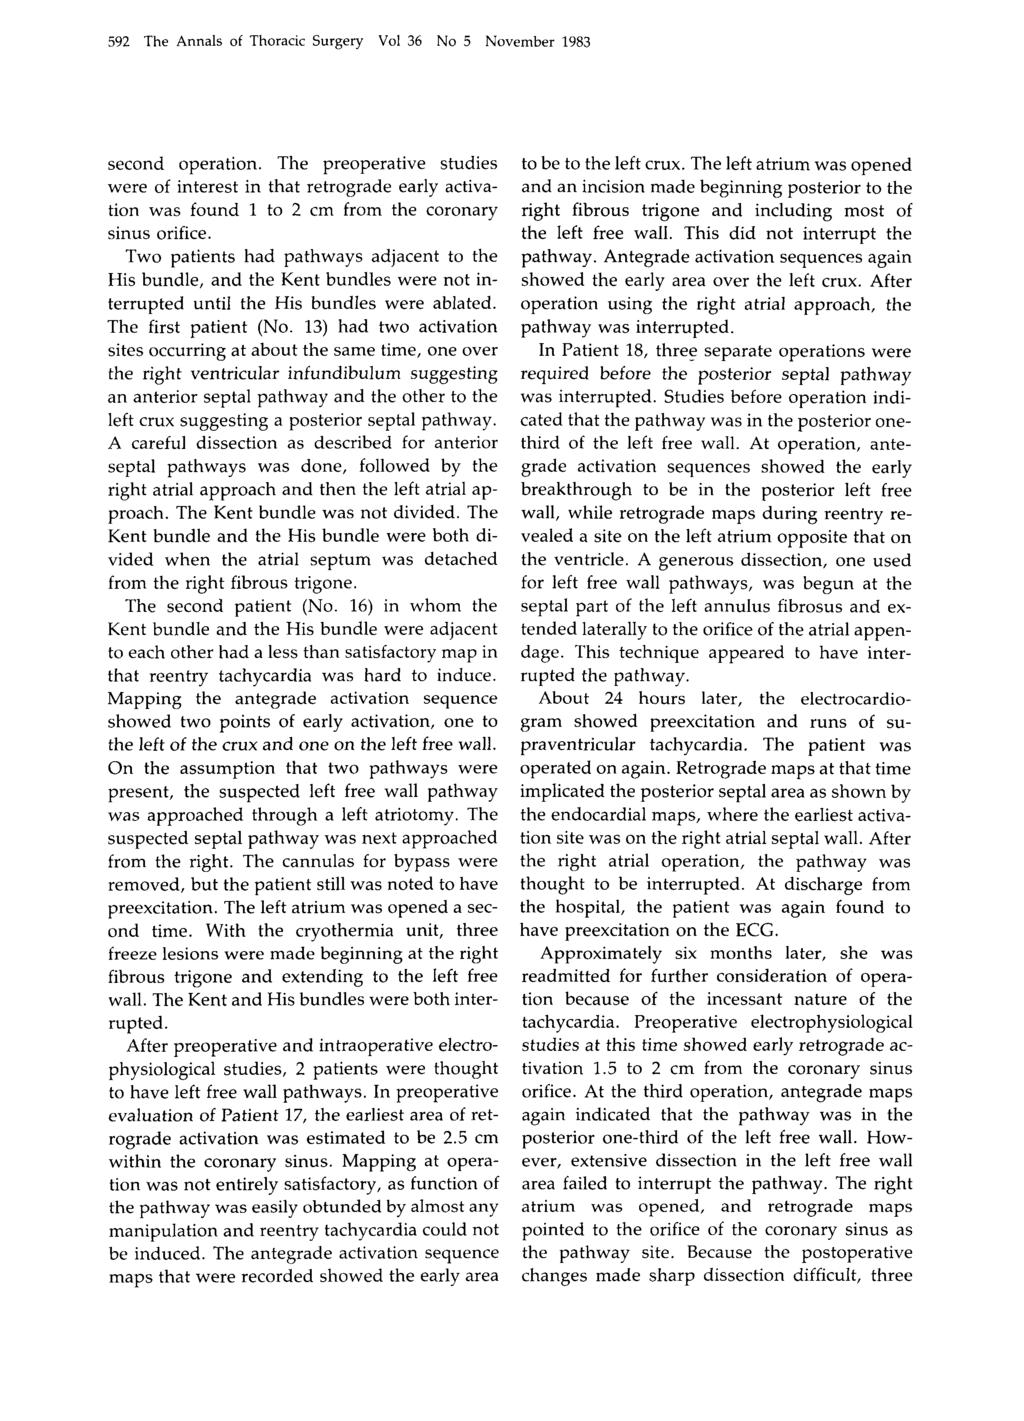 592 The Annals of Thoracic Surgery Vol 36 No 5 November 1983 second operation.